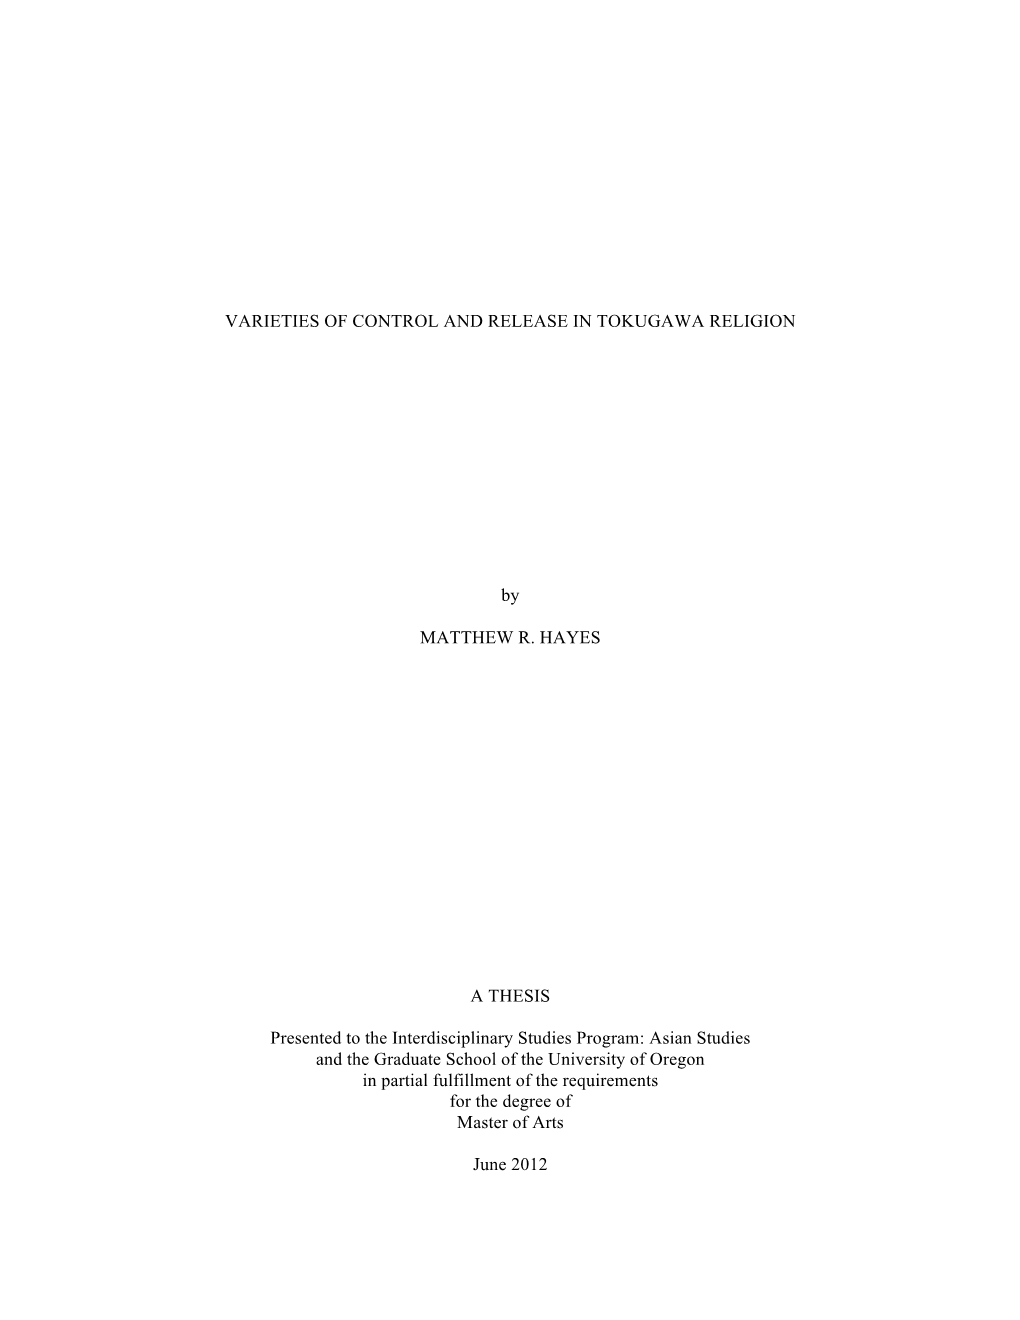 VARIETIES of CONTROL and RELEASE in TOKUGAWA RELIGION by MATTHEW R. HAYES a THESIS Presented to the Interdisciplinary Studies Pr